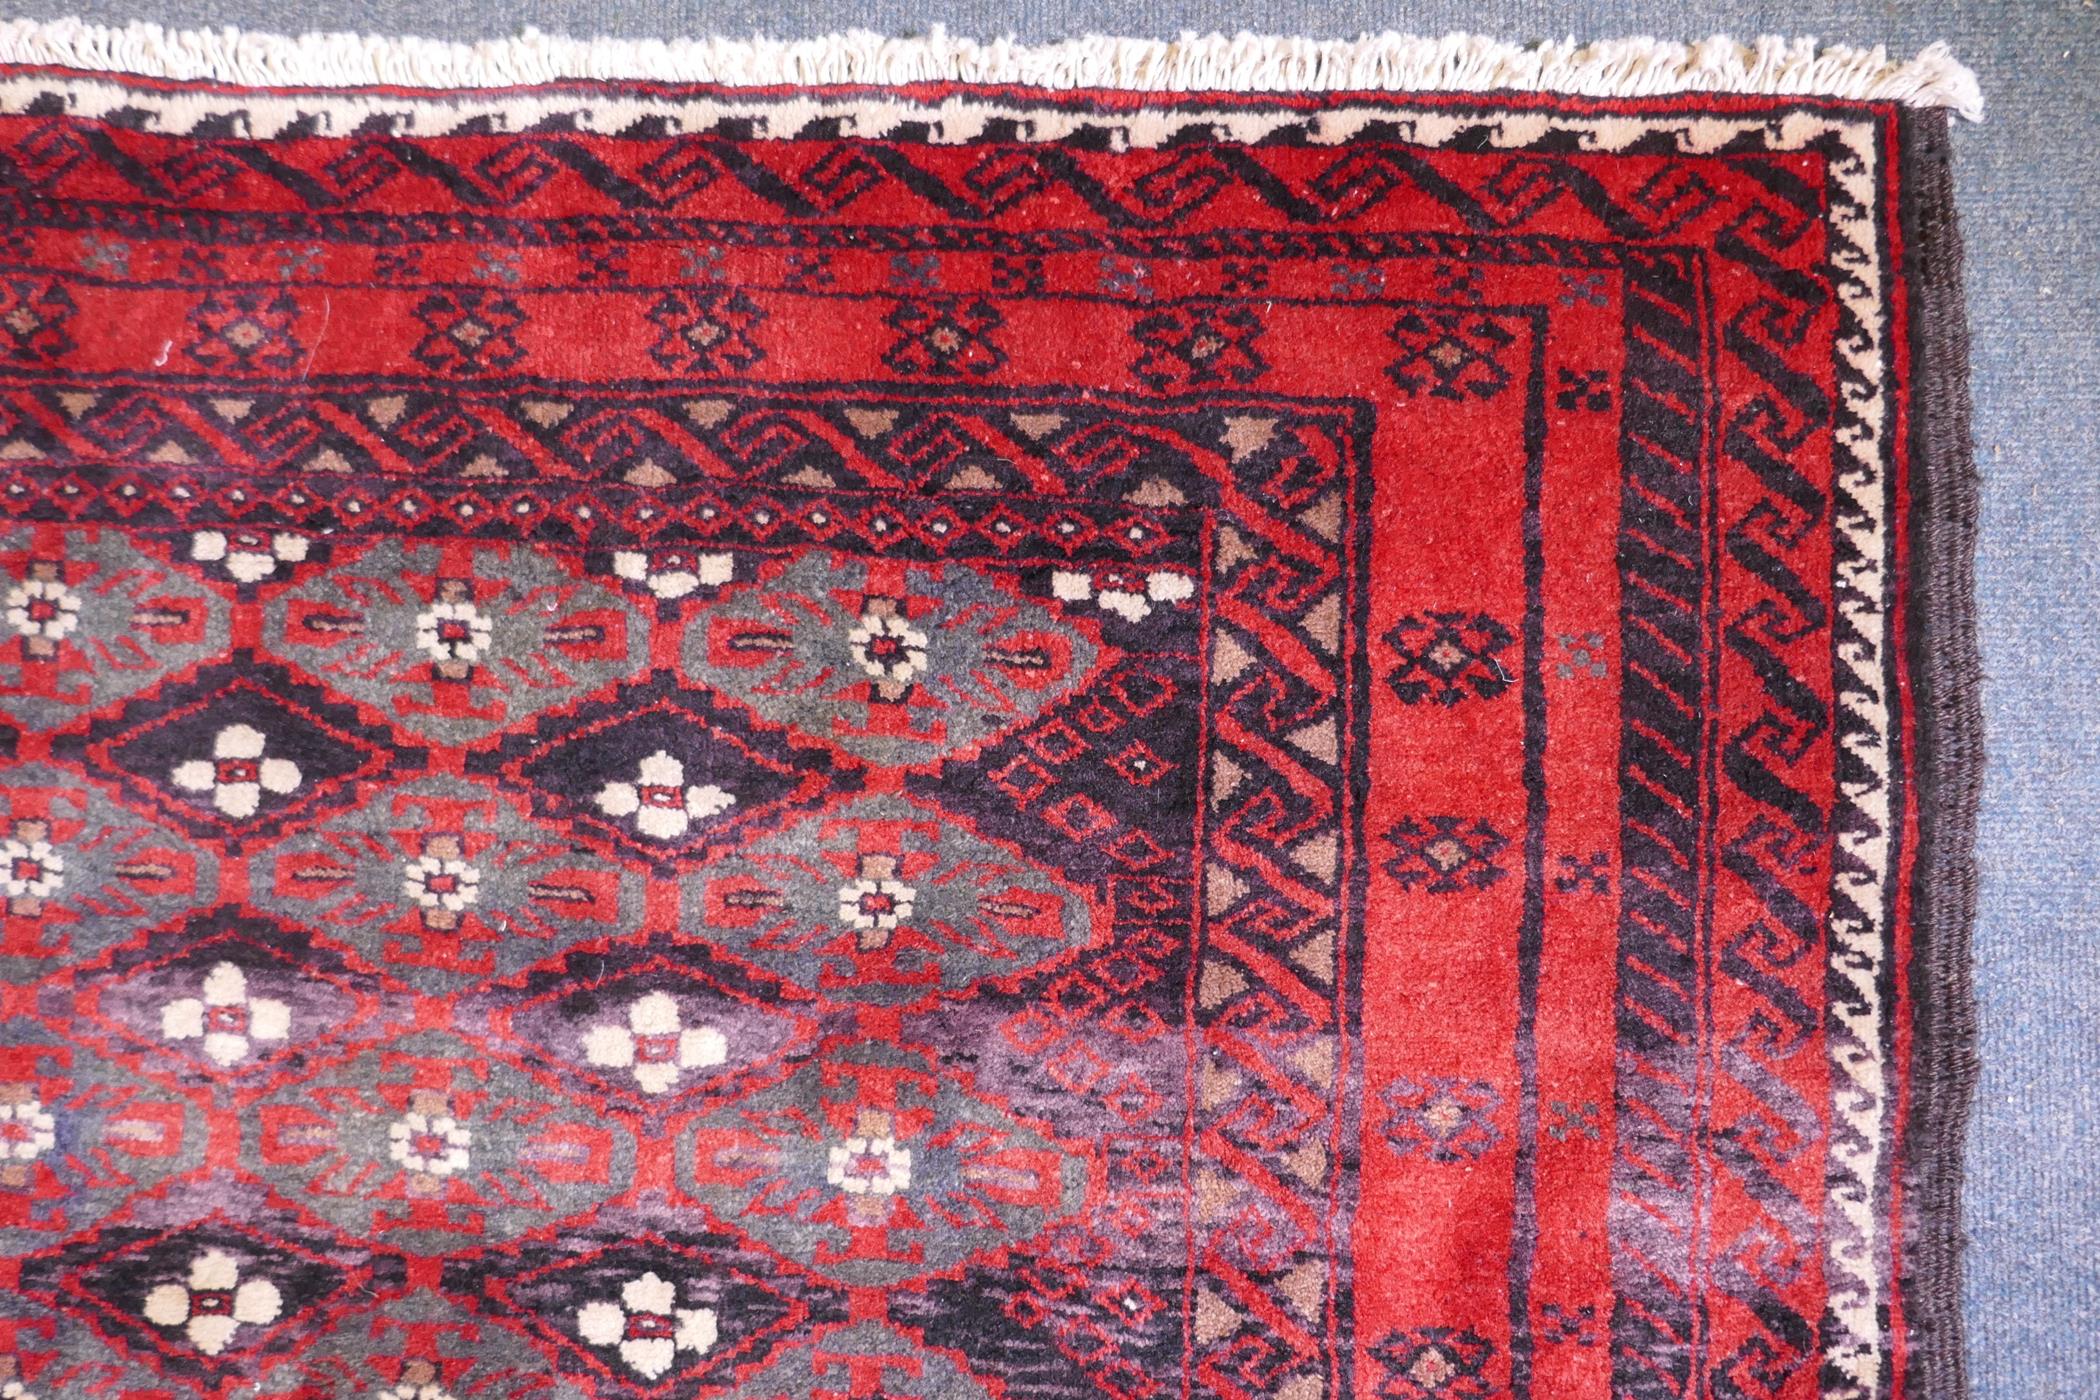 A full pile hand woven red ground carpet with a geometric floral design, 268 x 130cm - Image 3 of 4